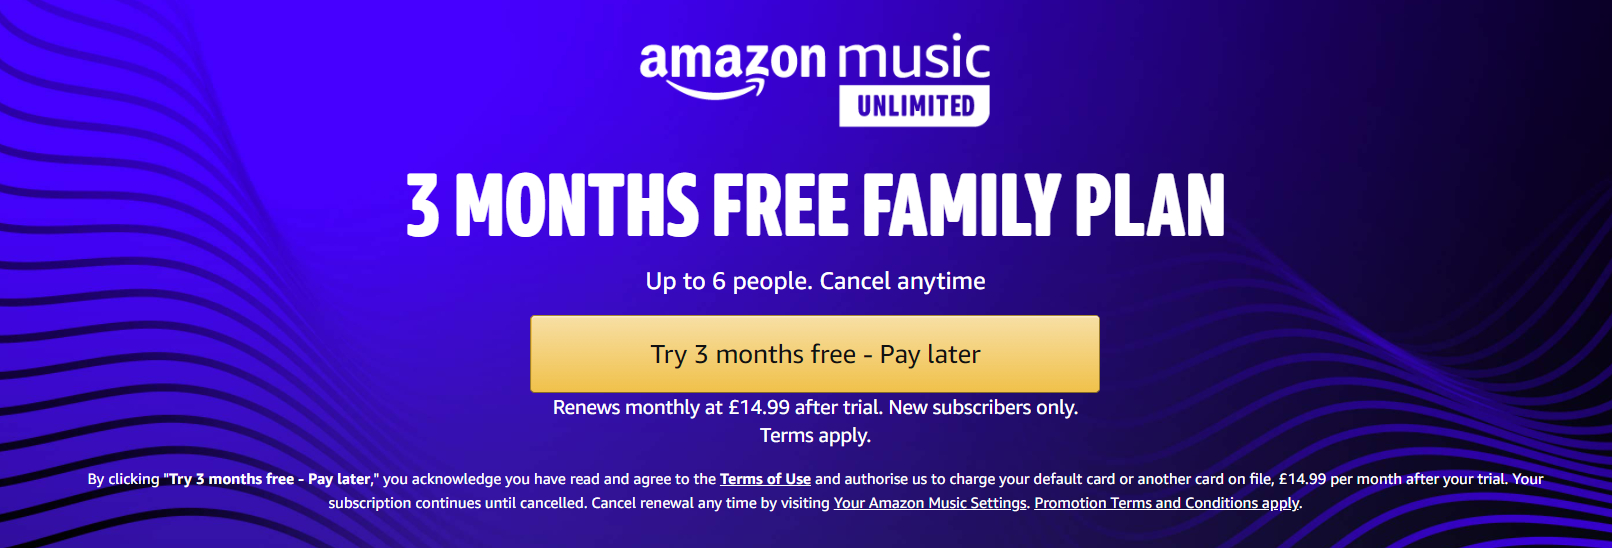 amazon music unlimited costs